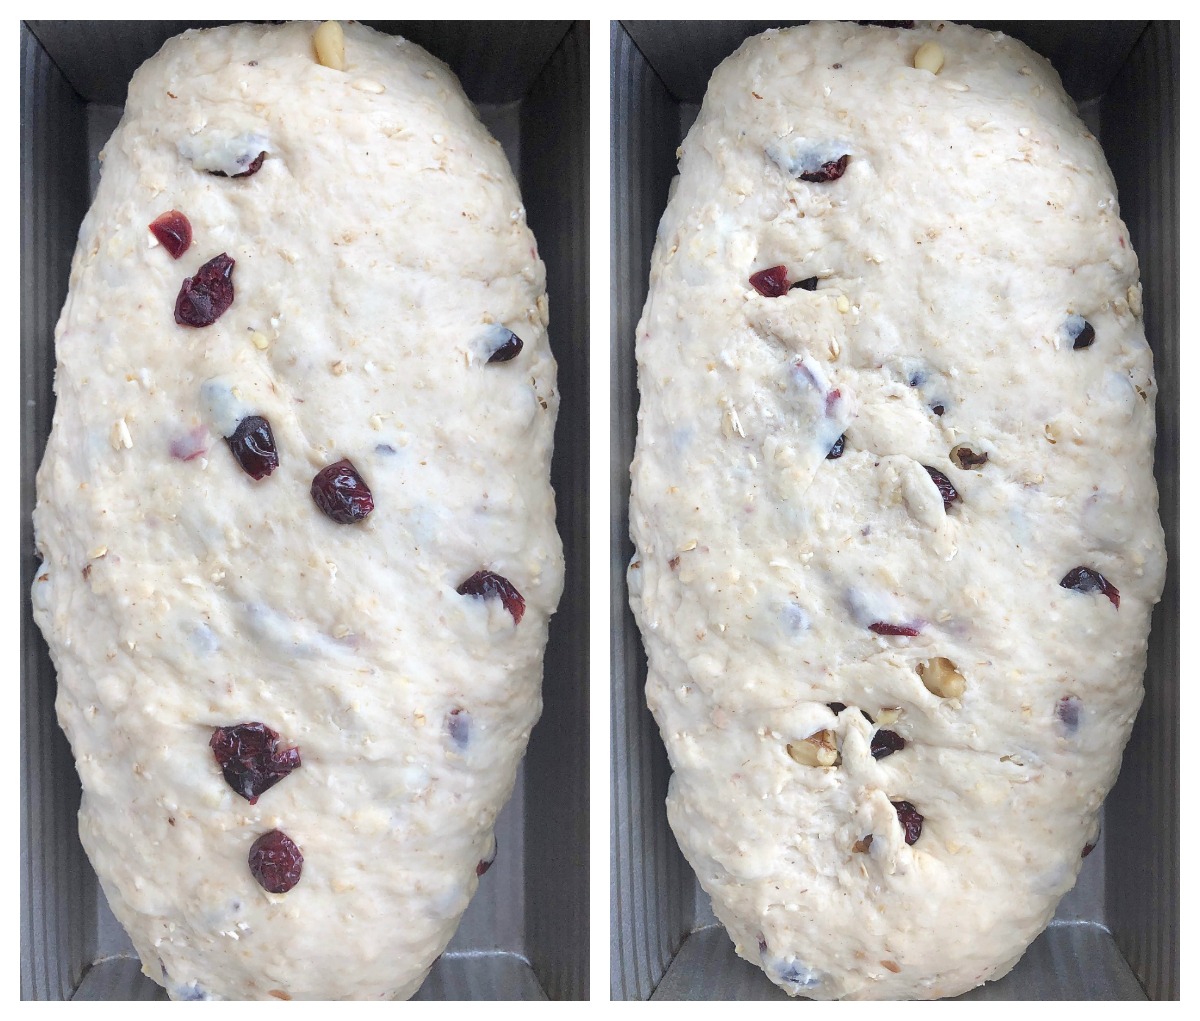 Oatmeal bread dough with cranberries and walnuts showoing how to tuck the fruit and nuts under the surface of the dough so they won't burn